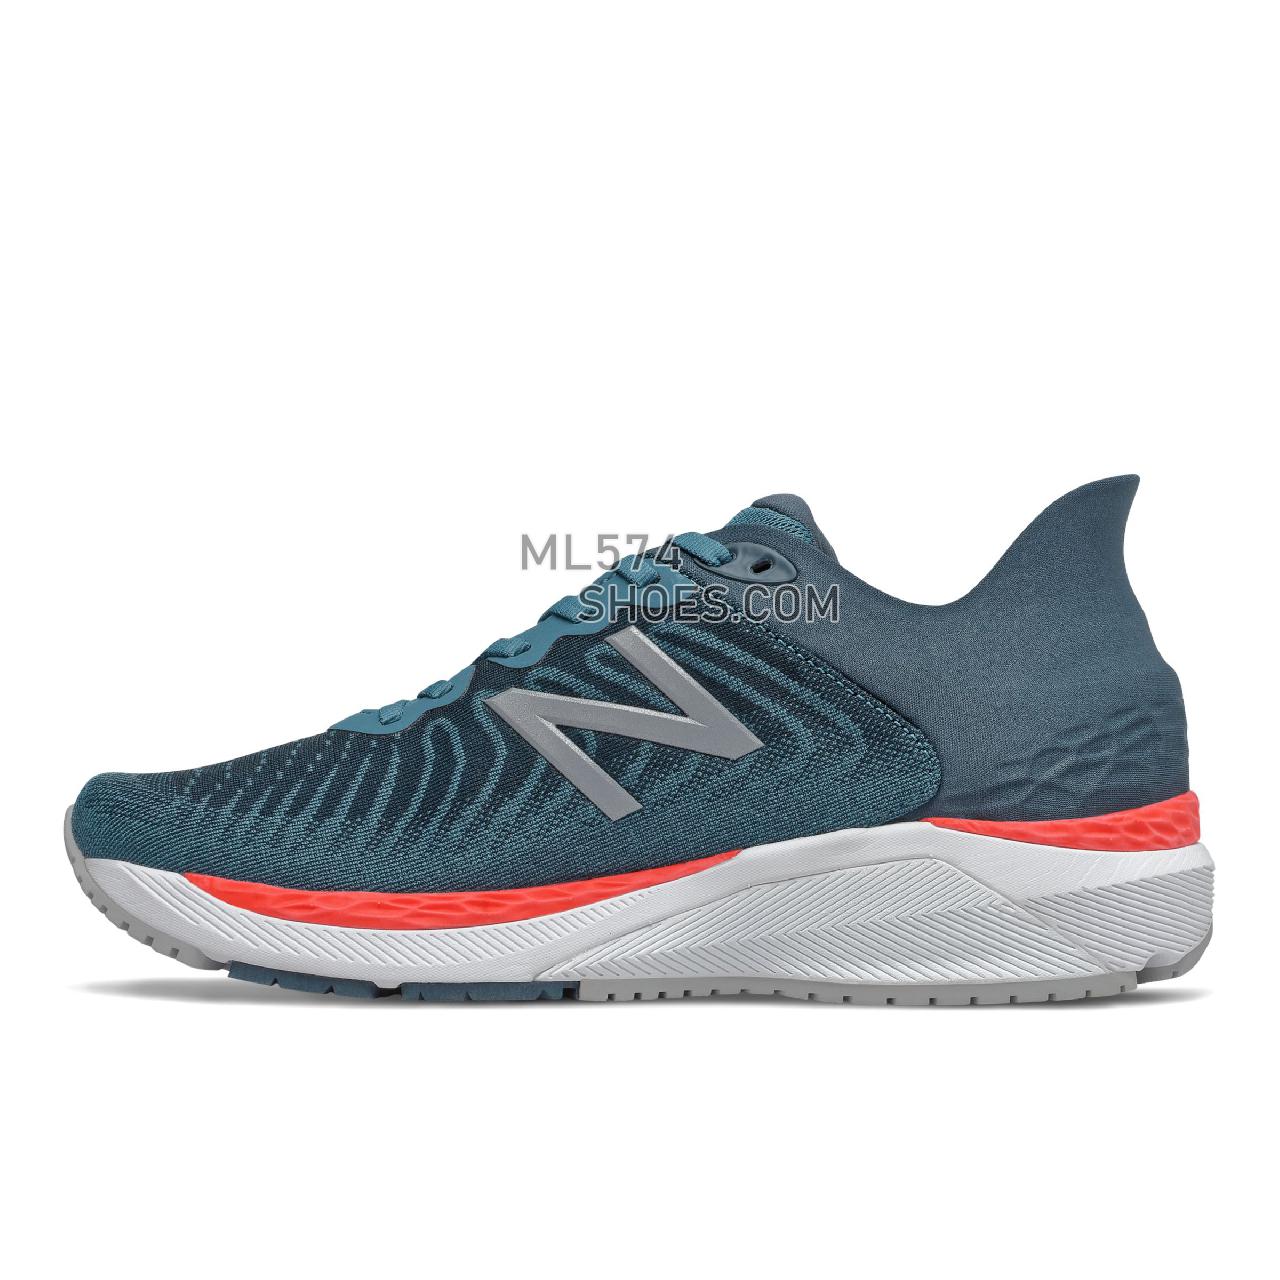 New Balance Fresh Foam 860v11 - Men's Stability Running - Jet Stream with Petrol and Neo Flame - M860E11